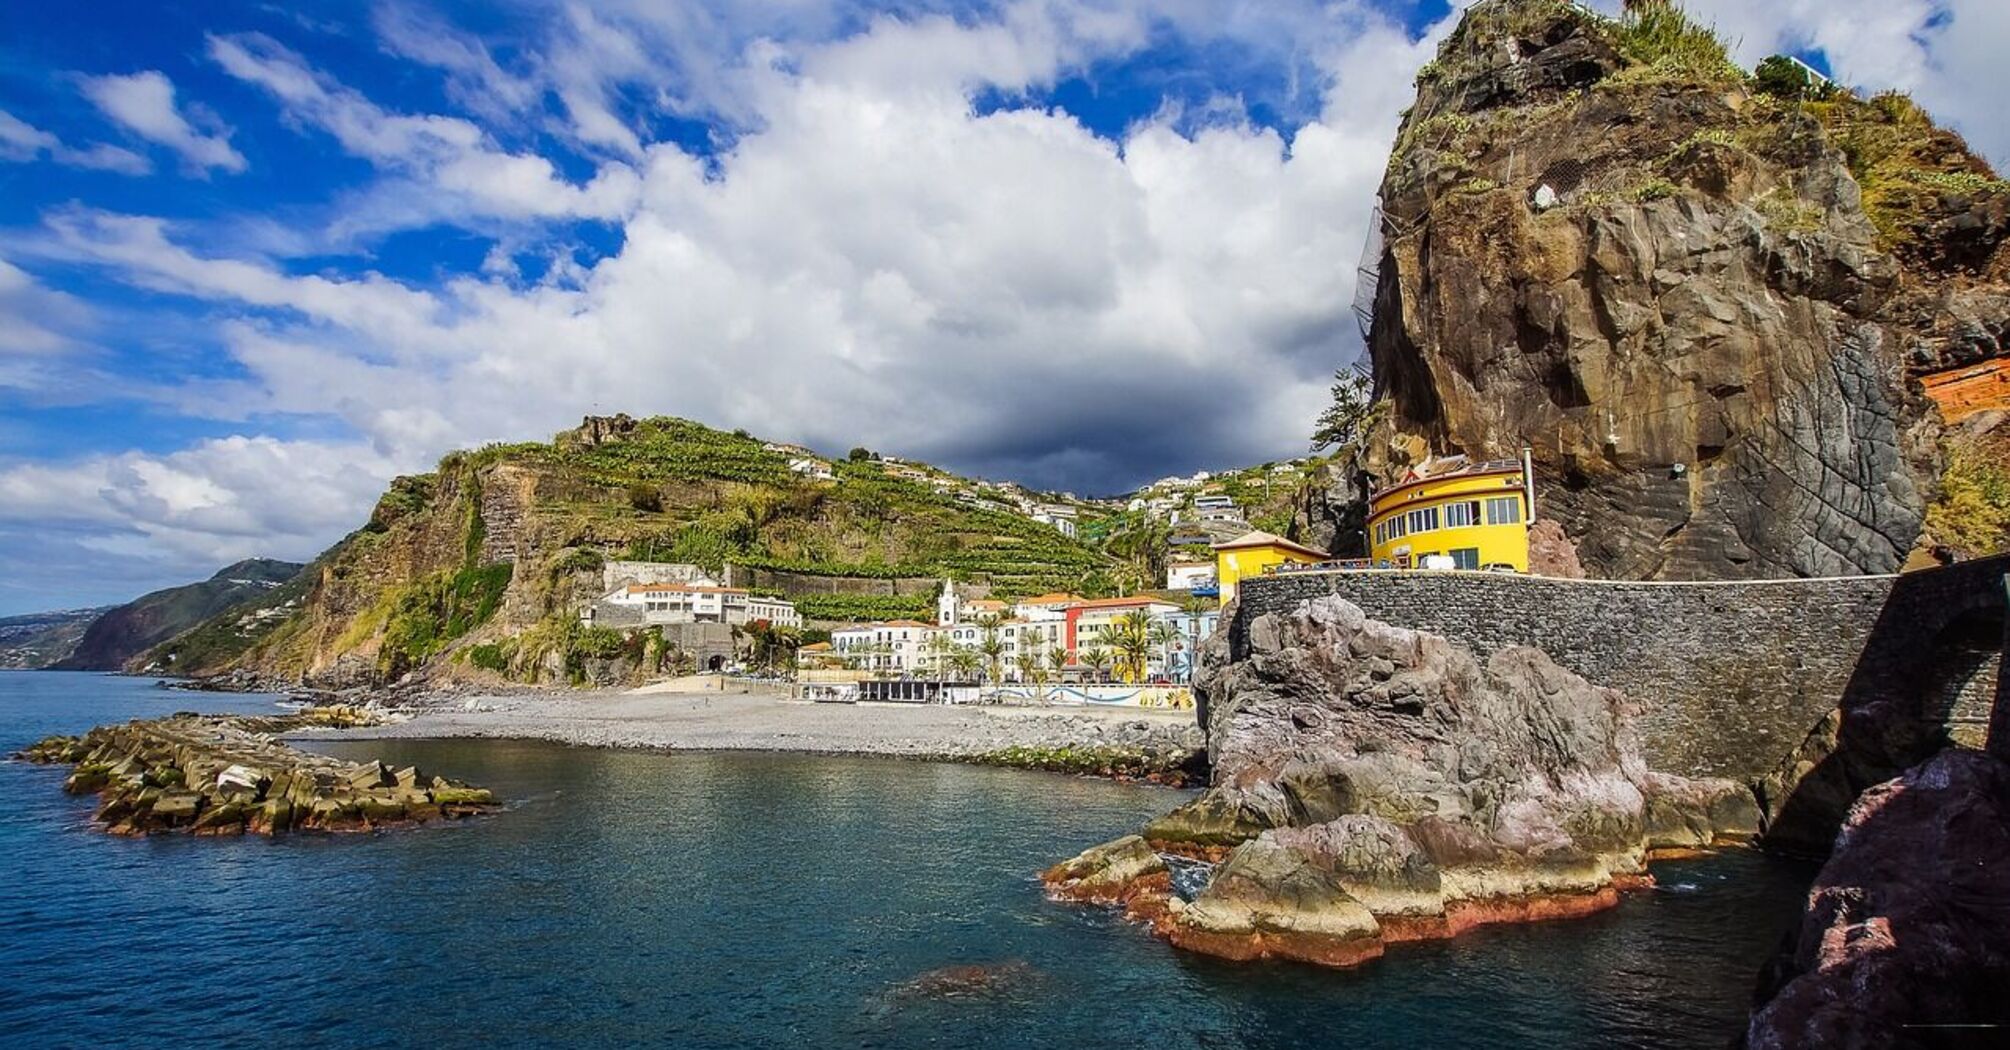 Top 5 Madeira hotels: from luxury villas with landscaped pools to historic grands with famous personalities in the guestbook